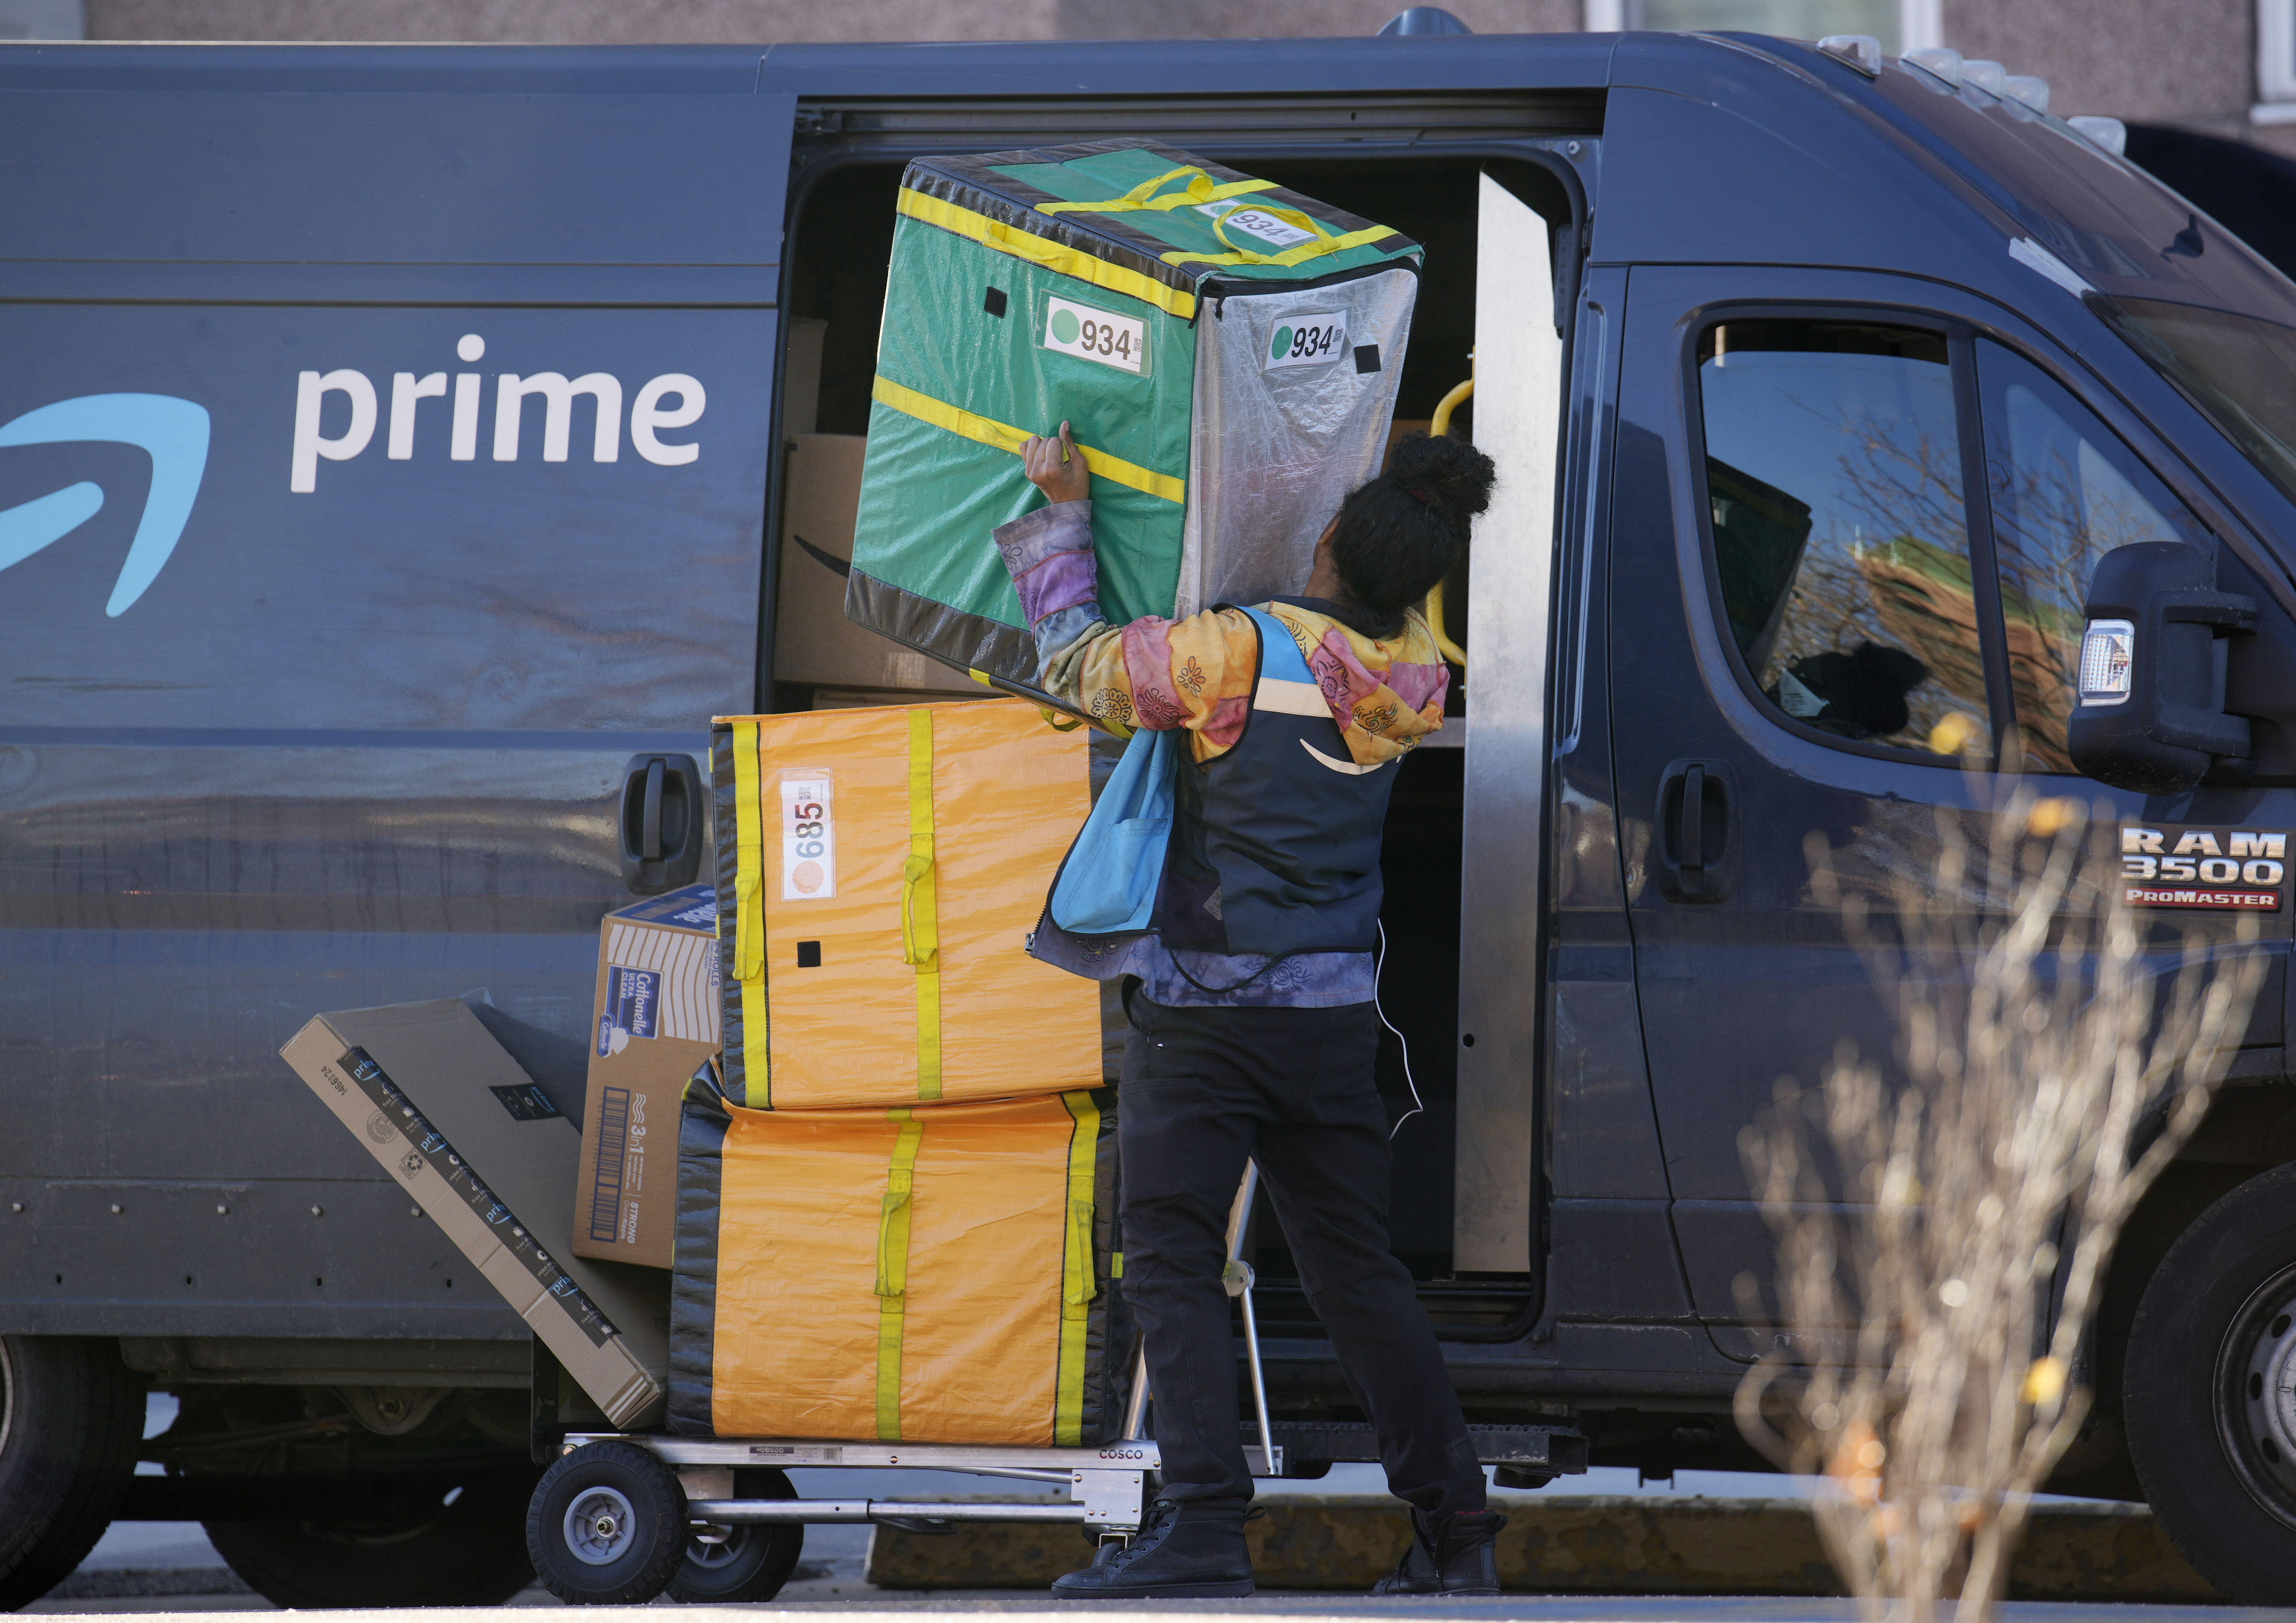 says Prime deliveries reached their fastest speeds ever last year